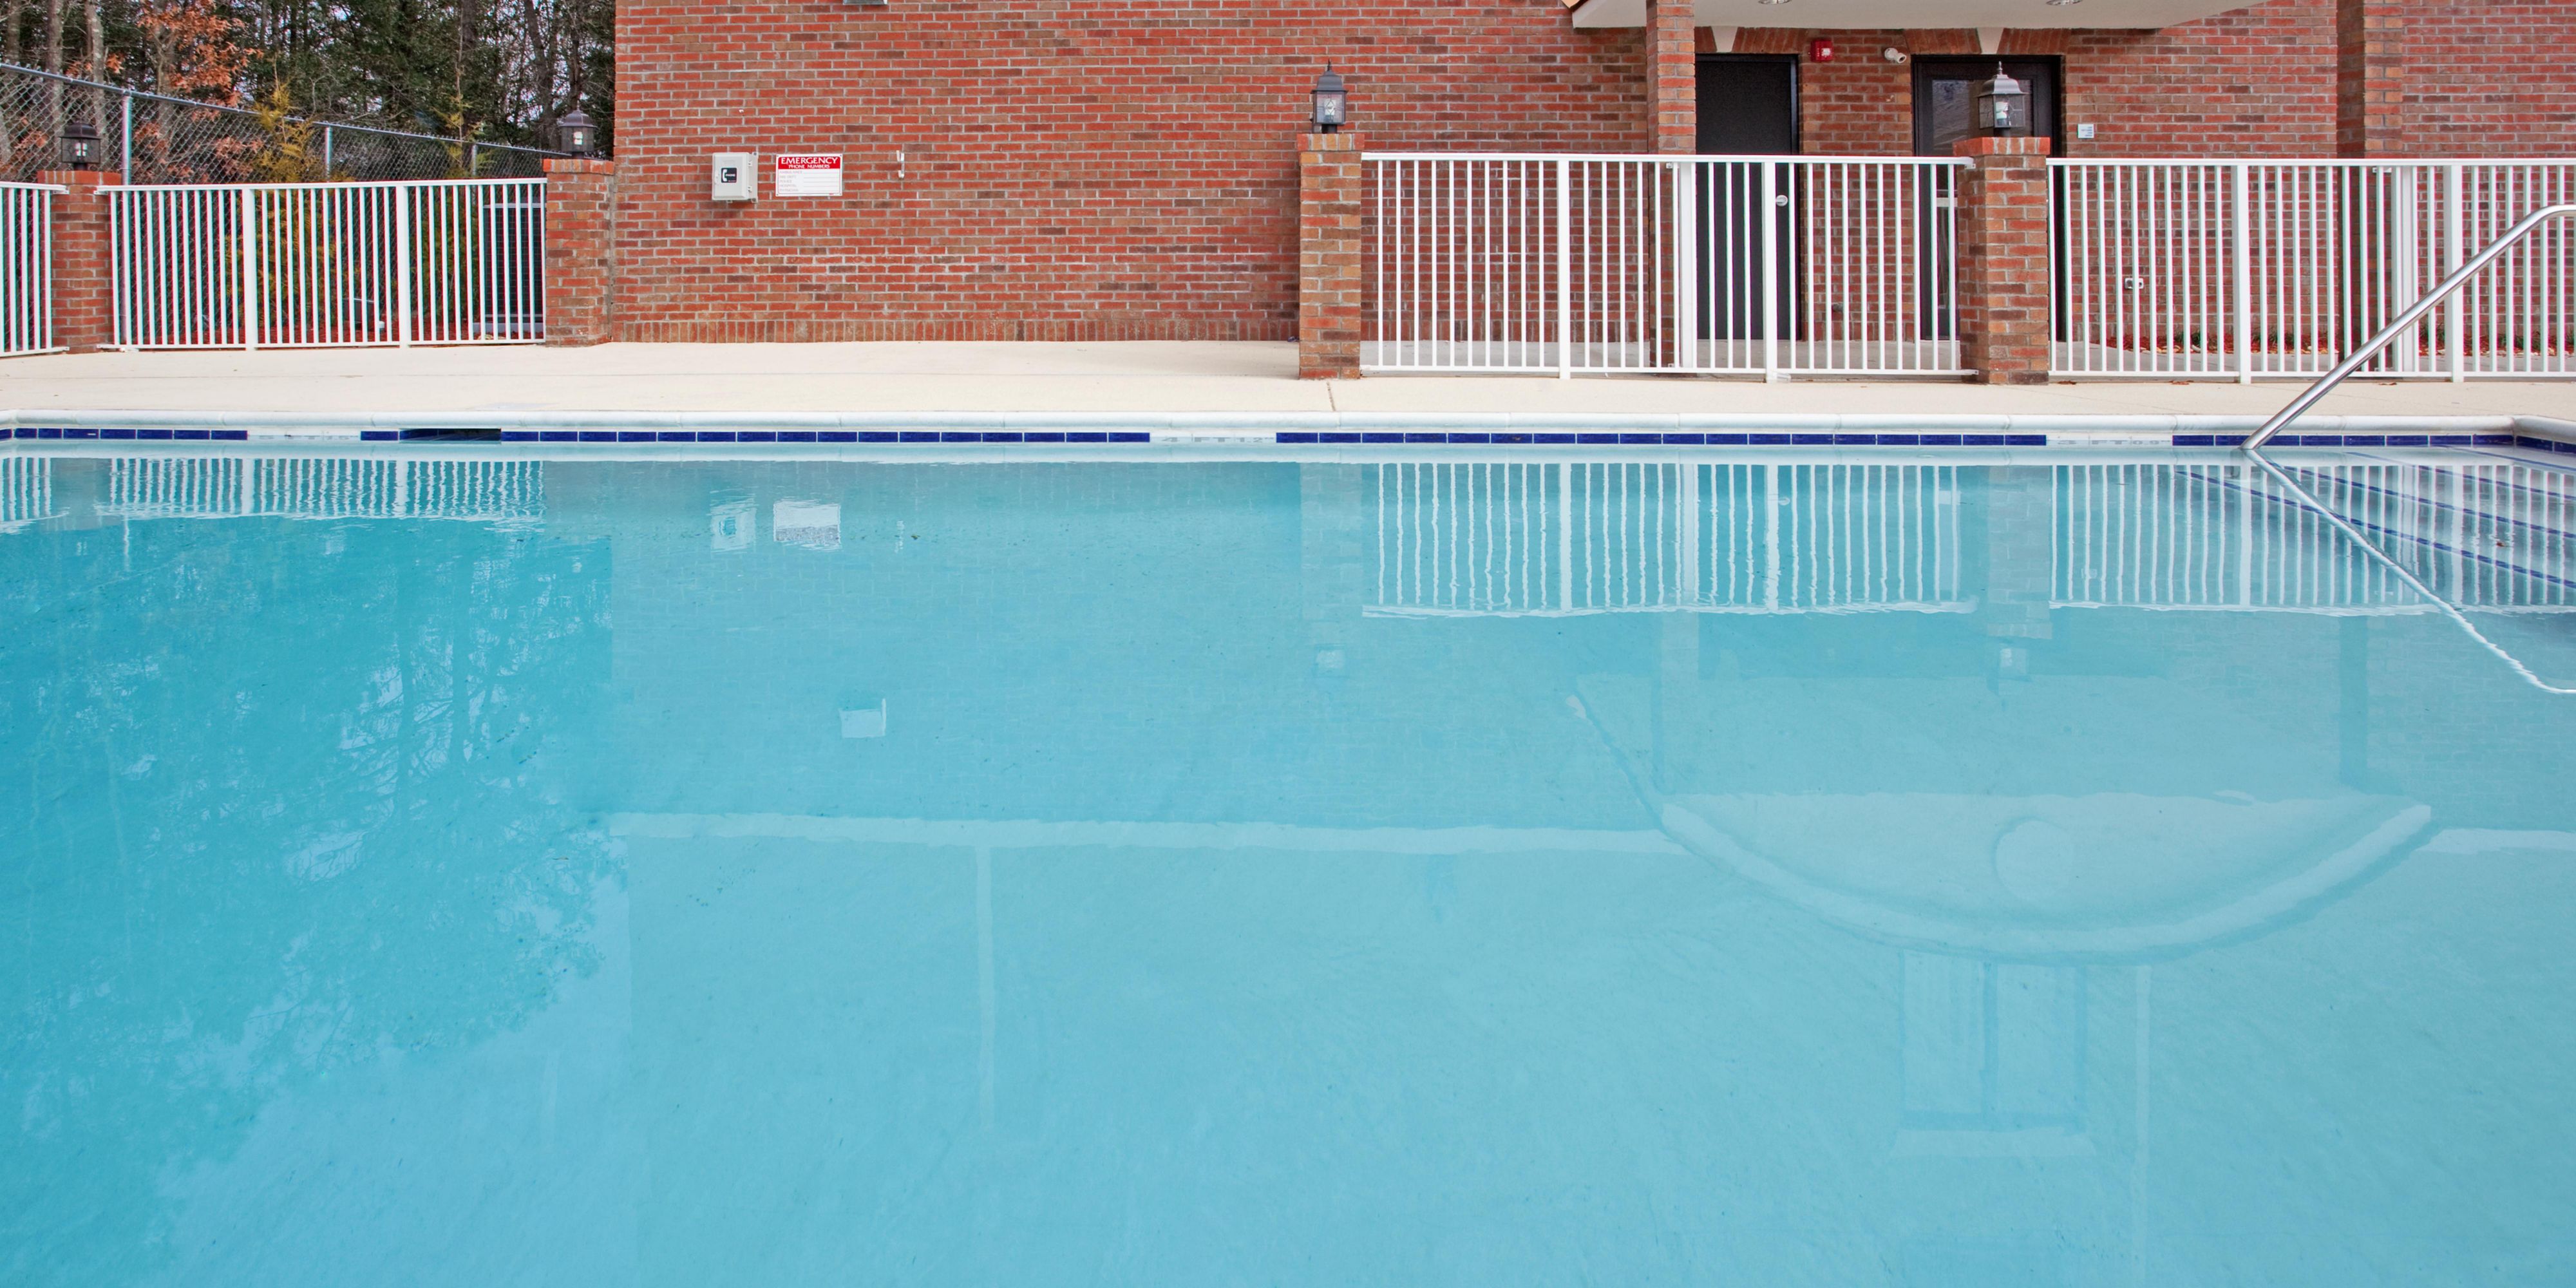 Bring your family and enjoy our outdoor pool while the weather is still warm!